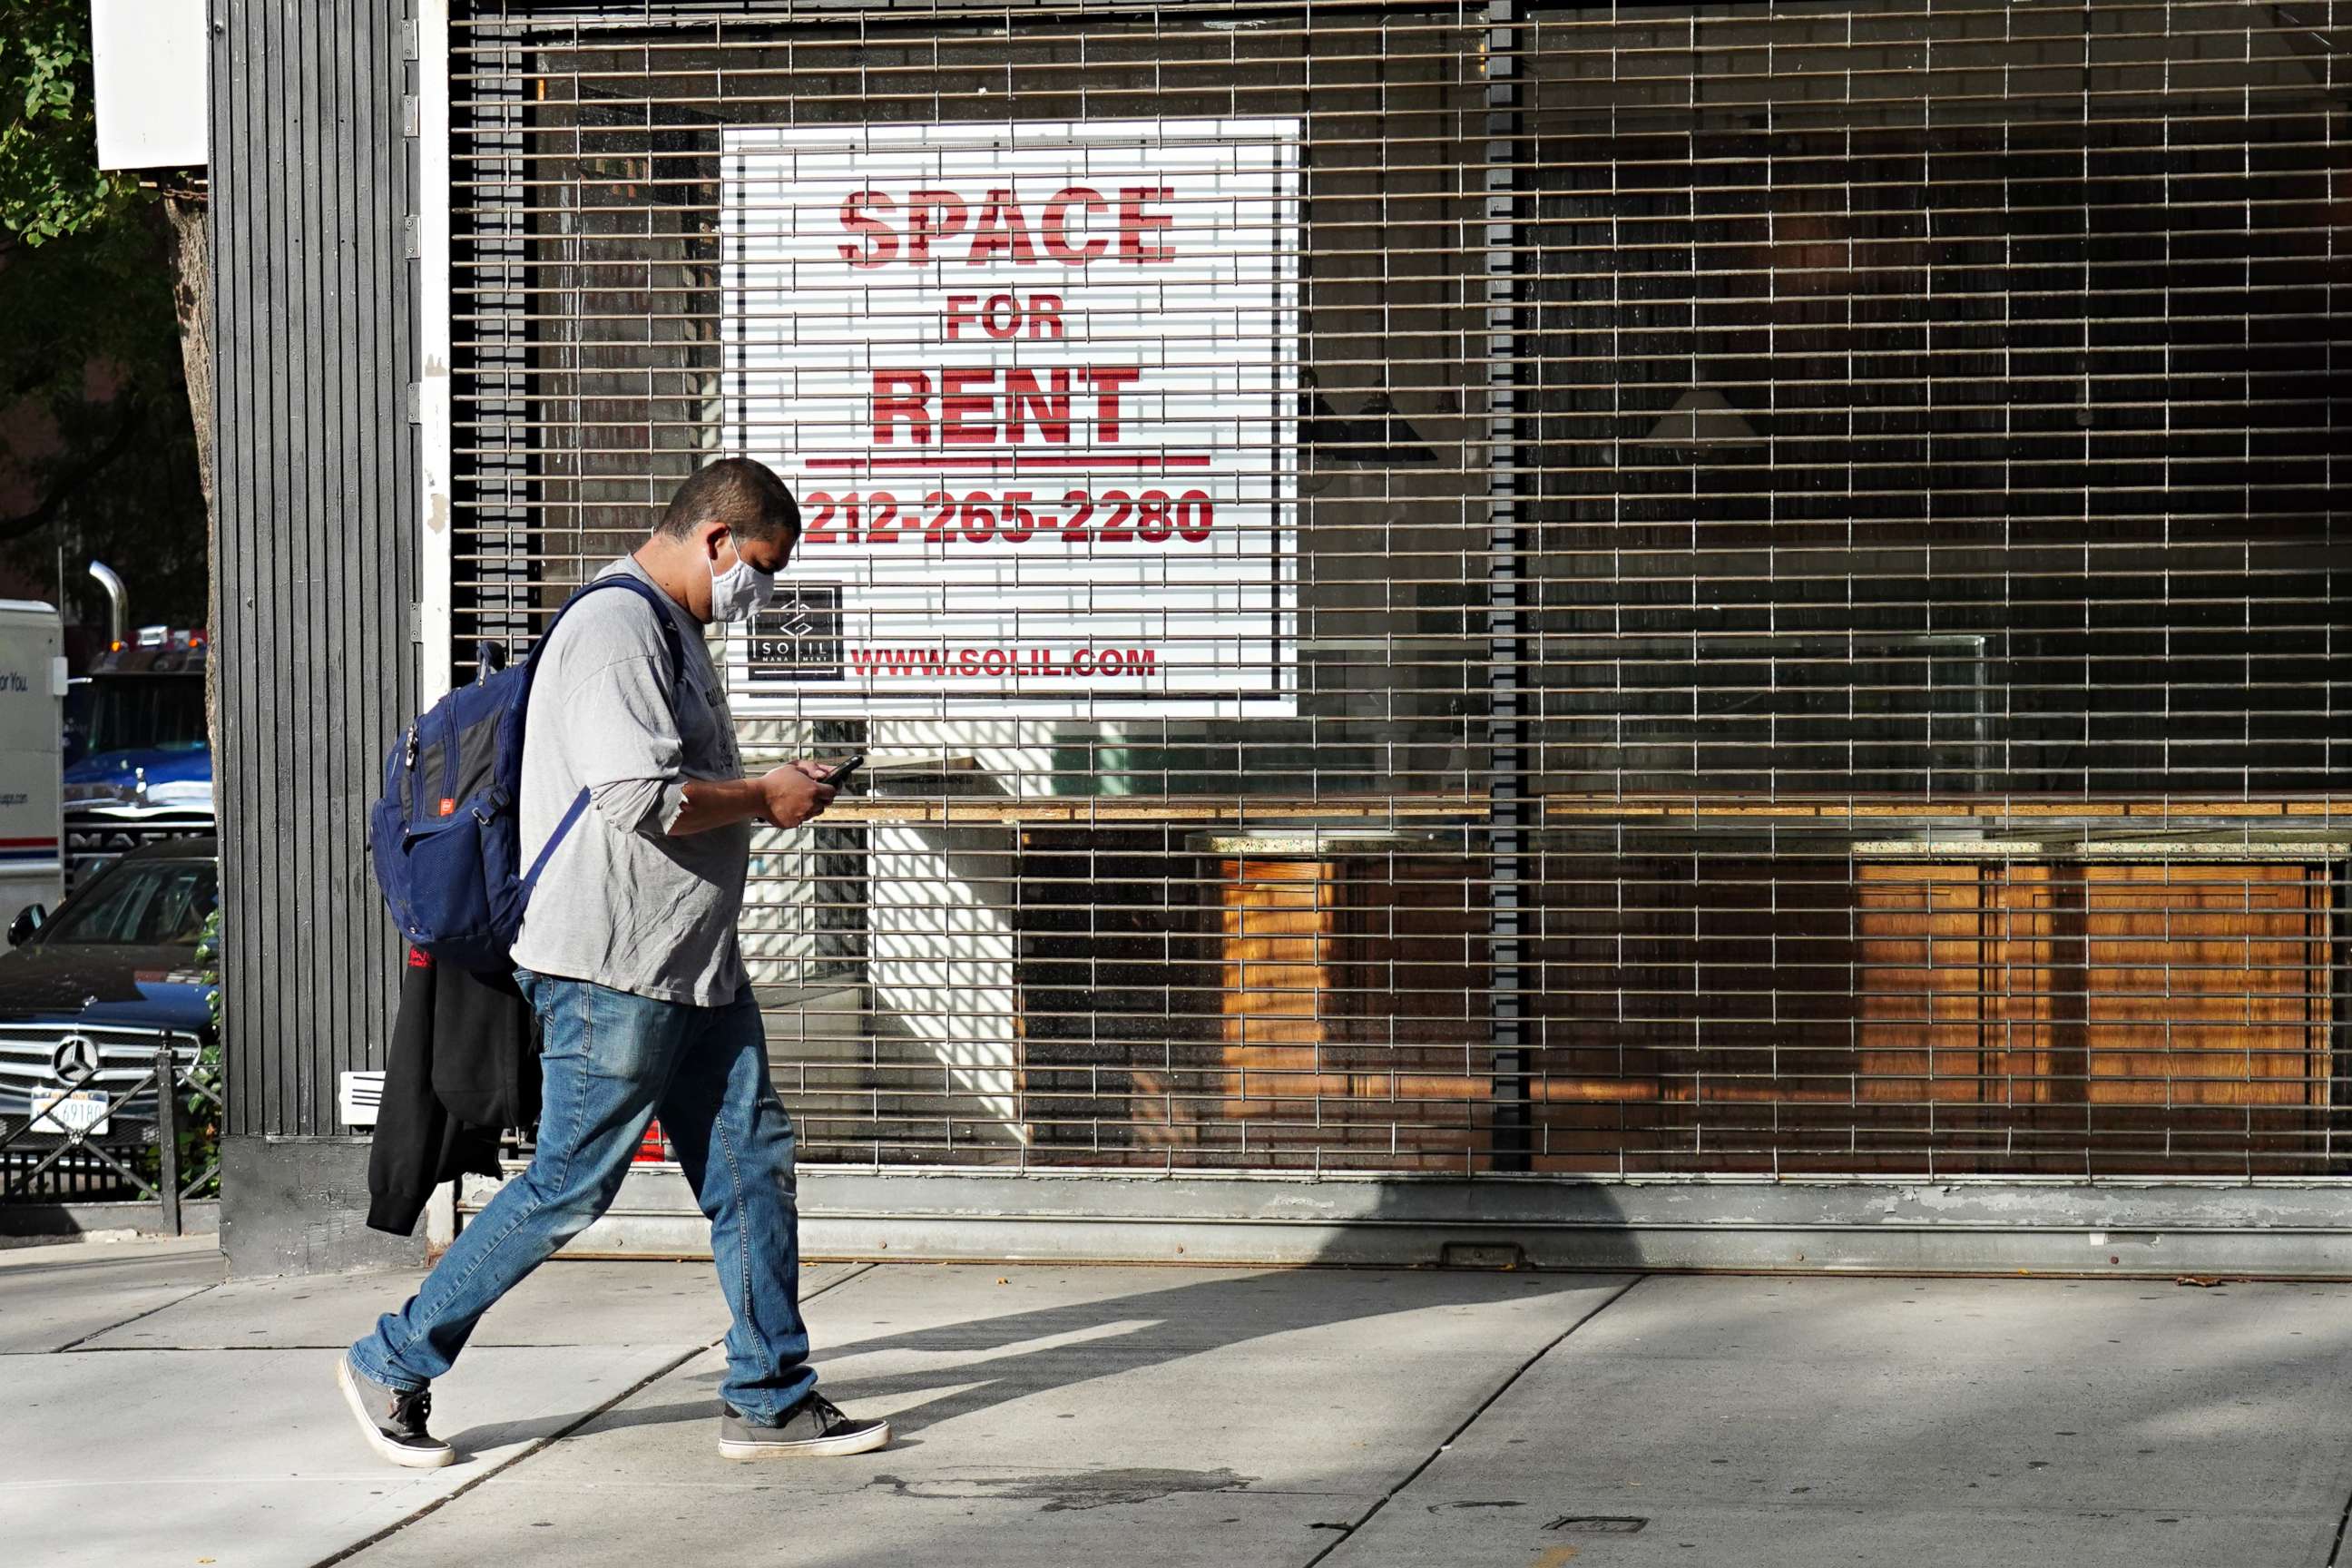 PHOTO: A man wearing a protective mask walks by a closed cafe with a sign in the window reading "SPACE FOR RENT" as the city continues reopening efforts following restrictions imposed to slow the spread of coronavirus on Oct. 19, 2020, in New York City.